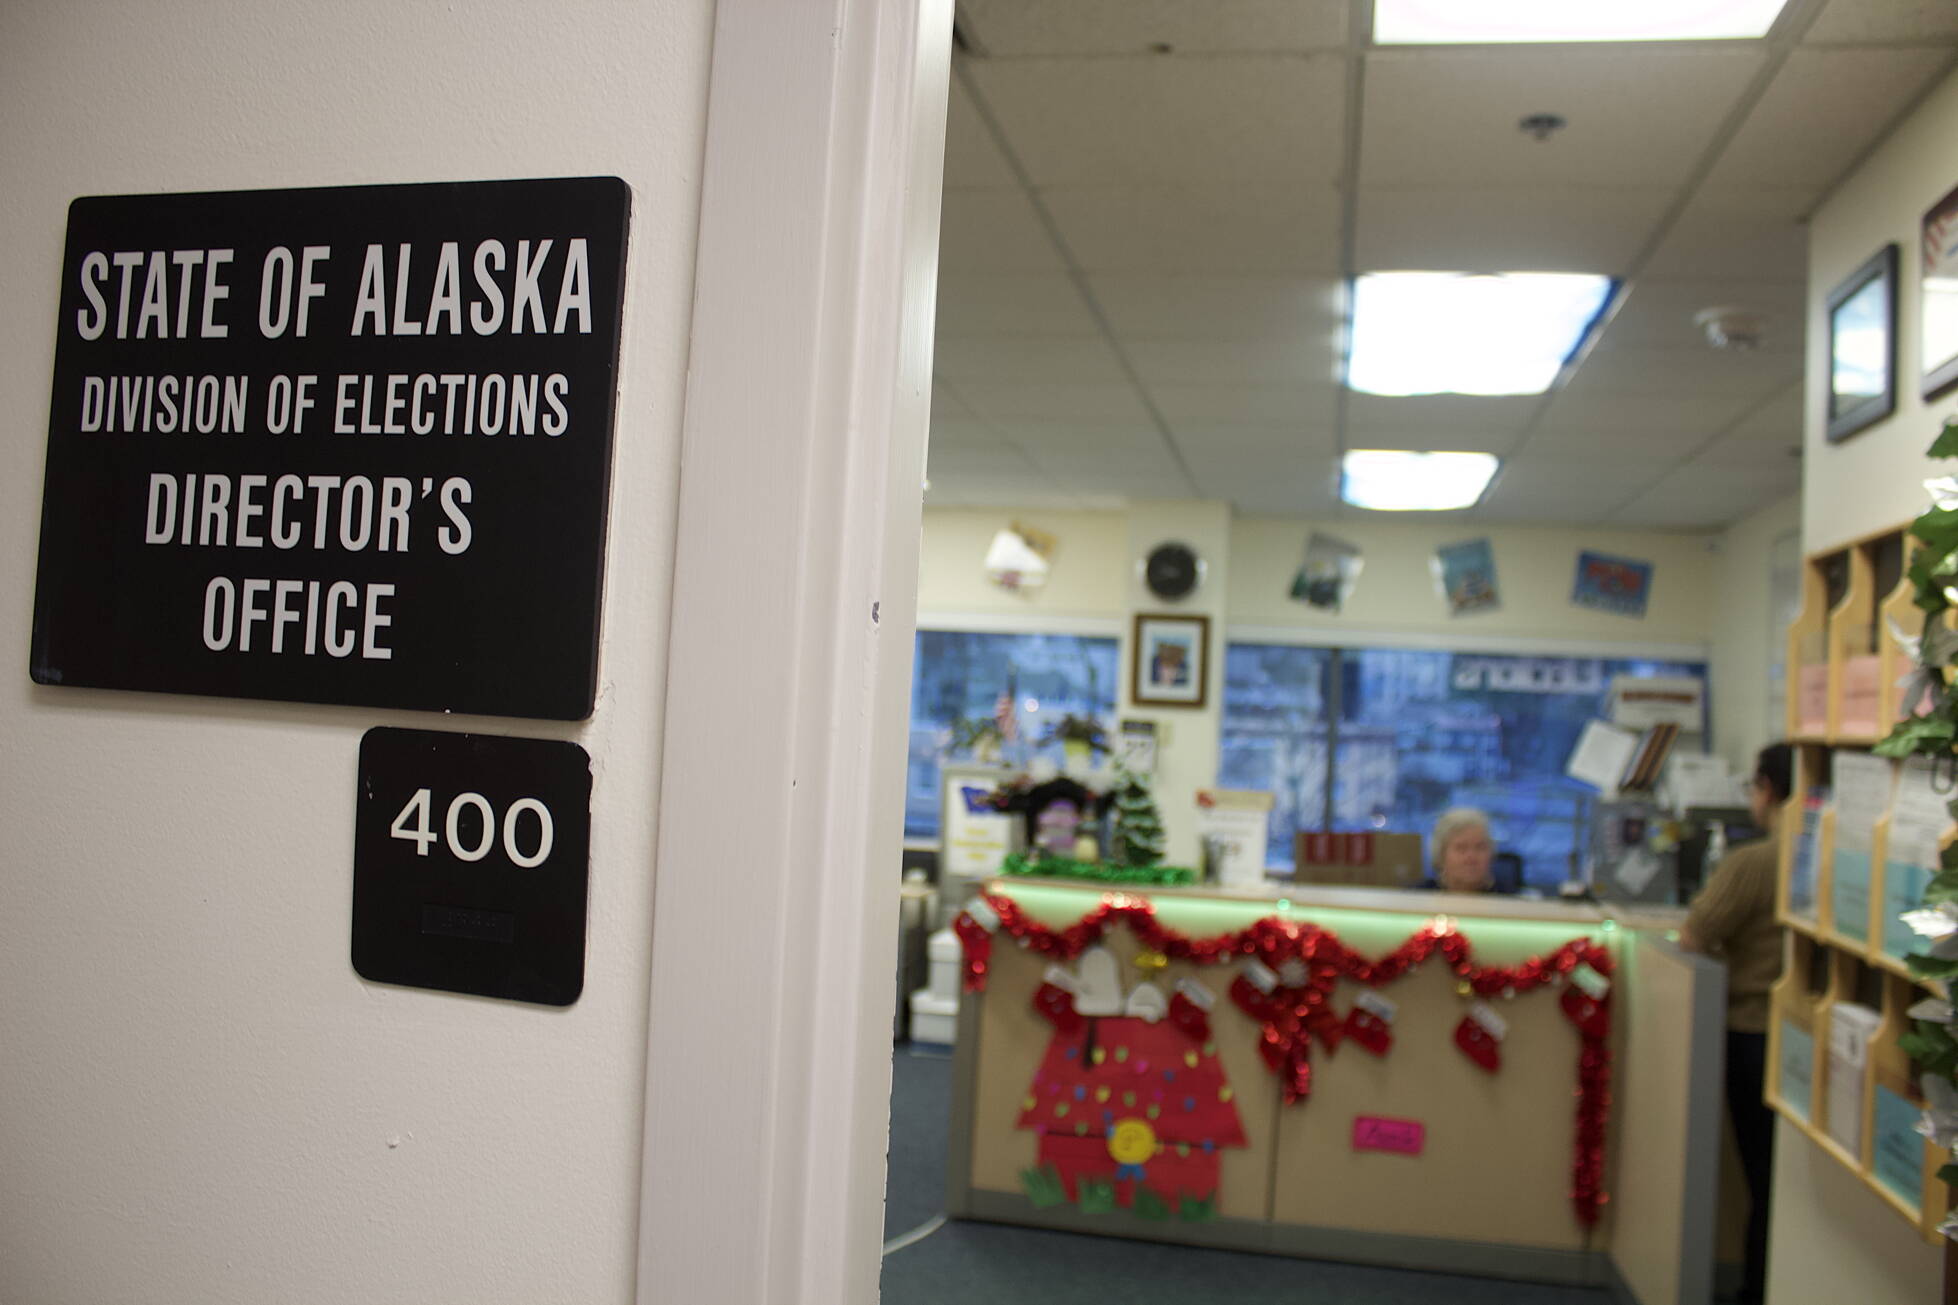 The final election results, including ranked choice votes, will be tallied starting at 4 p.m. Wednesday at the Alaska Division of Election’s director’s office. The tally will be covered live by the Juneau Empire, as well as broadcast live by other media including KTOO. (Mark Sabbatini / Juneau Empire)